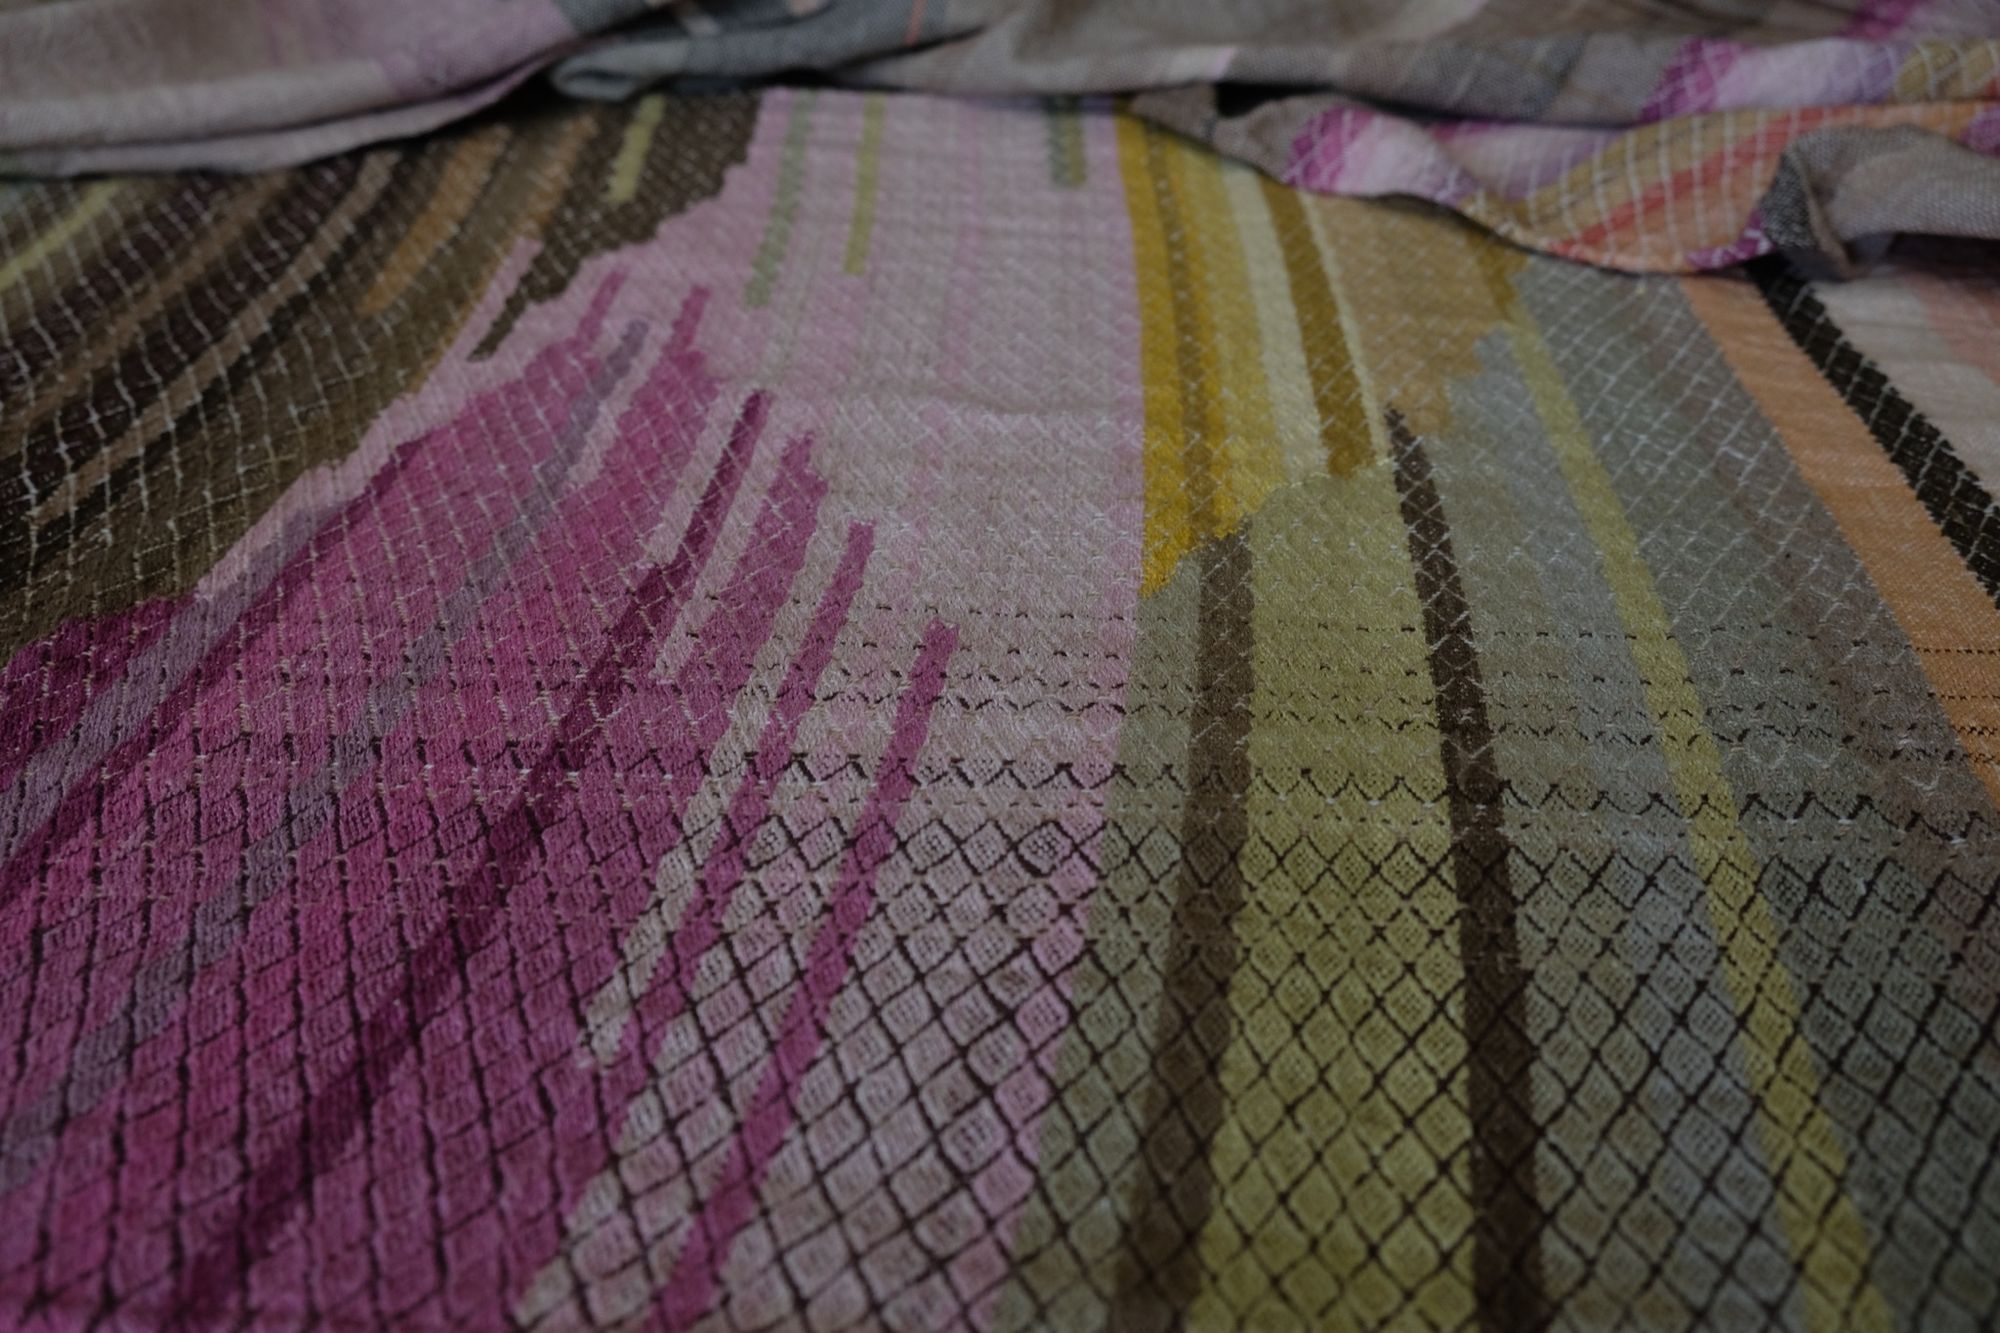 detail of A long length of handwoven fabric with a diamond pattern in a naturally dyed rainbow of color, brown, grey, pink, purple, yellow, green, orange and lavender lays on a wooden floor